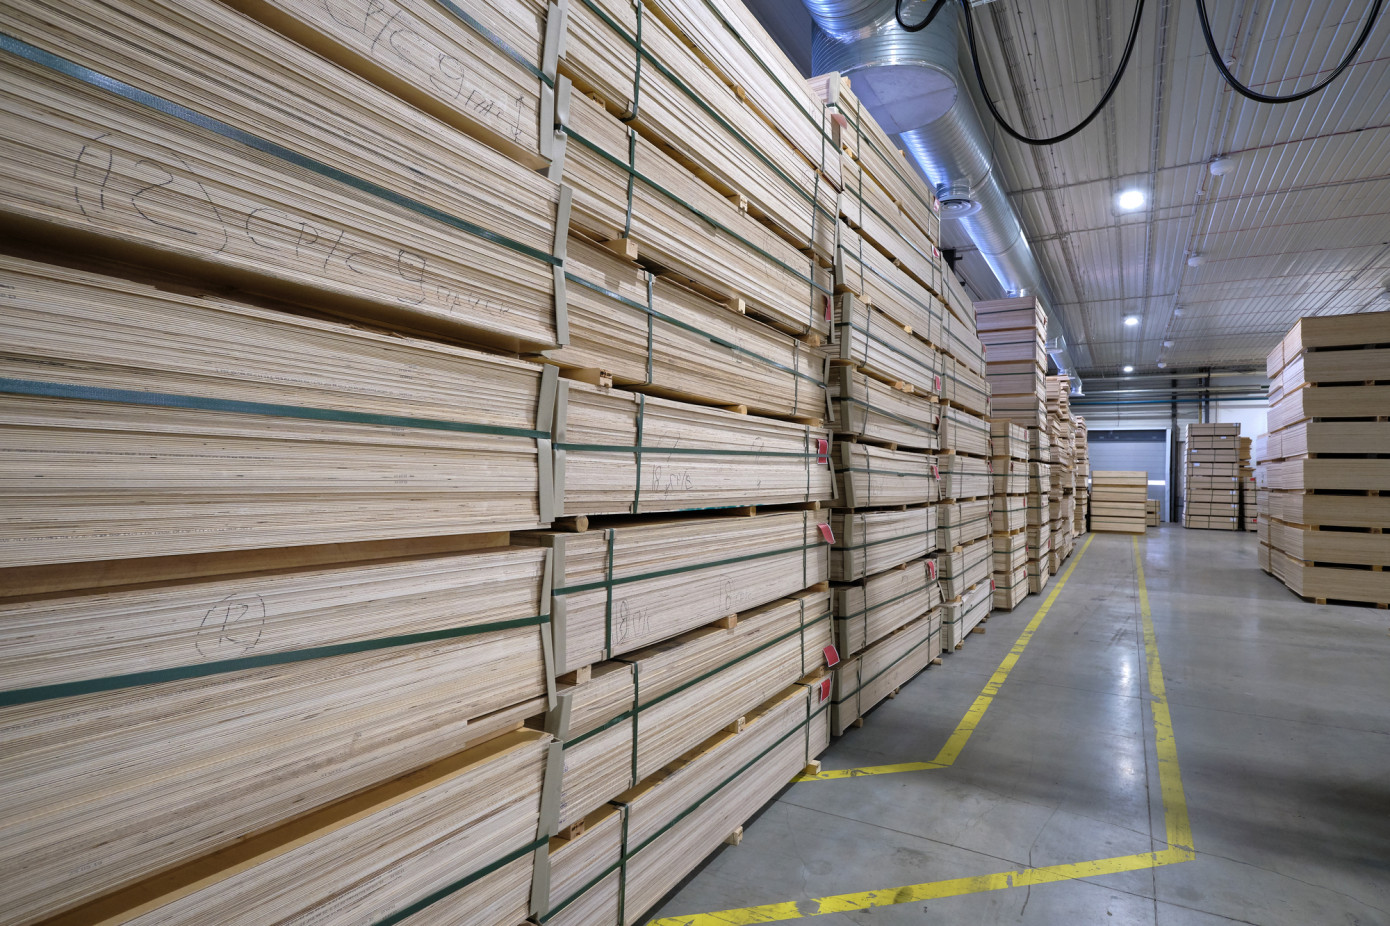 In October, price for plywood exported from China decreases 7%